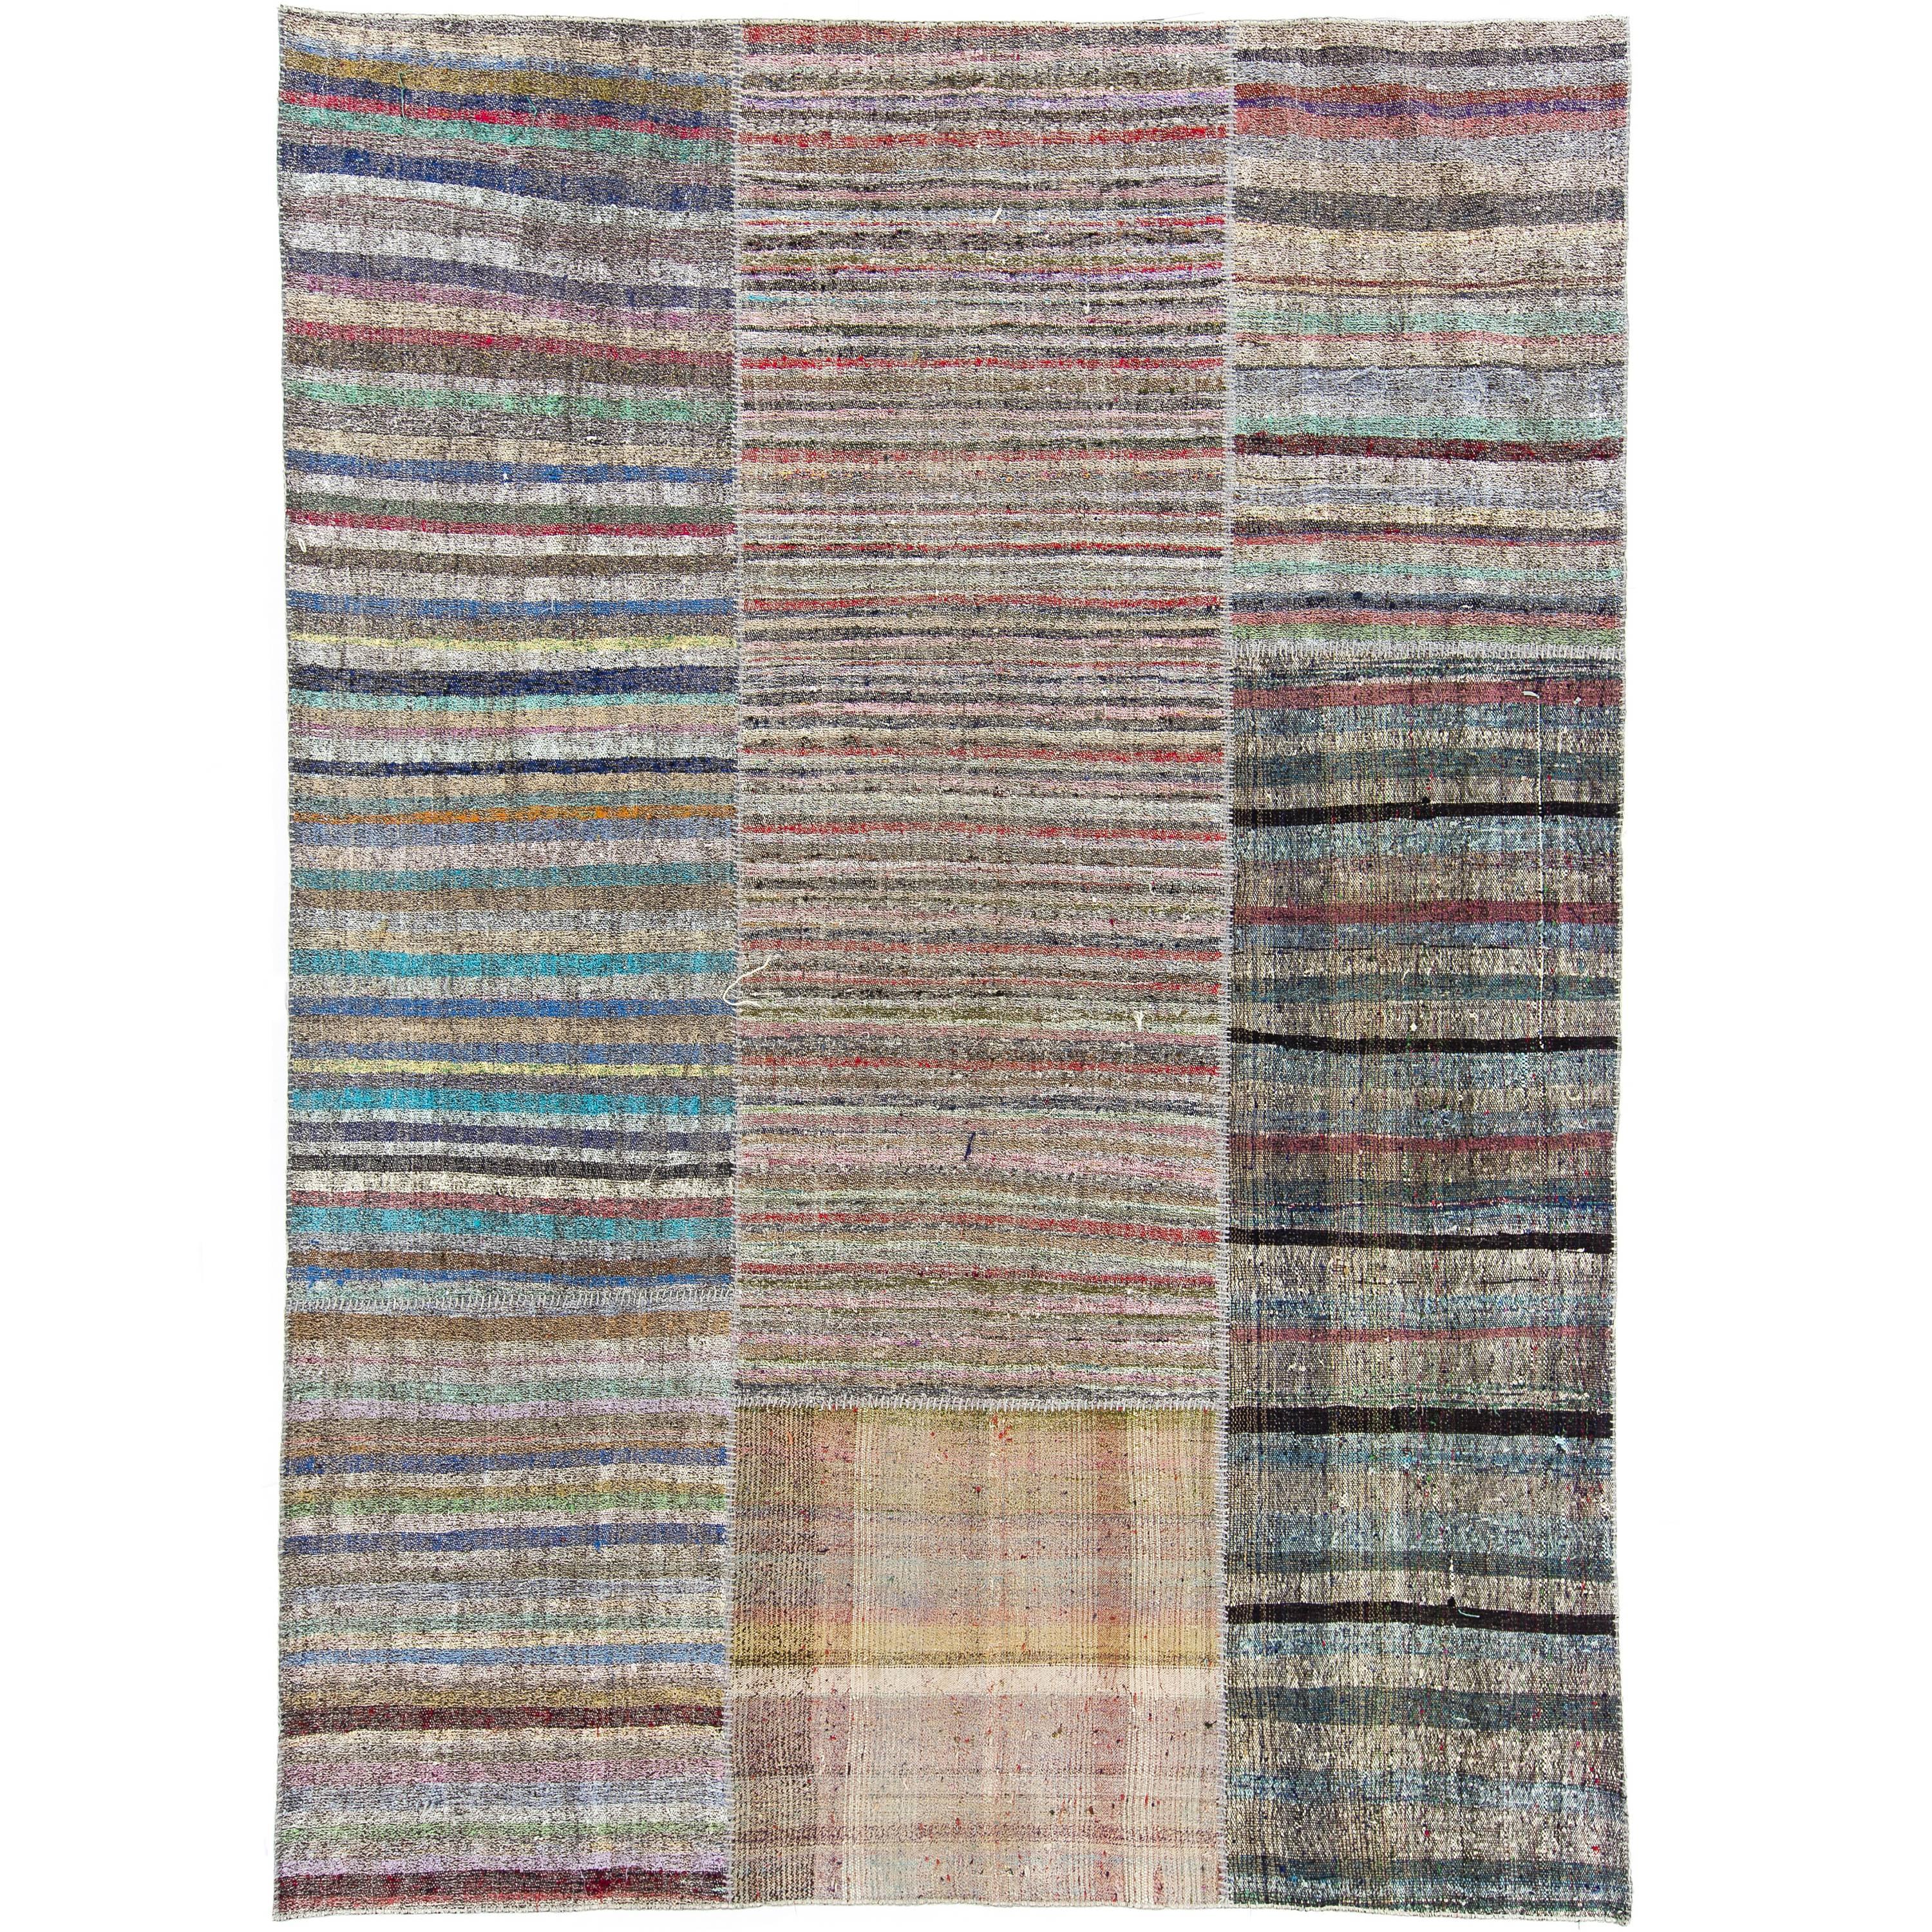 Cotton and Goat Wool Kilim Rug with Colorful Stripes